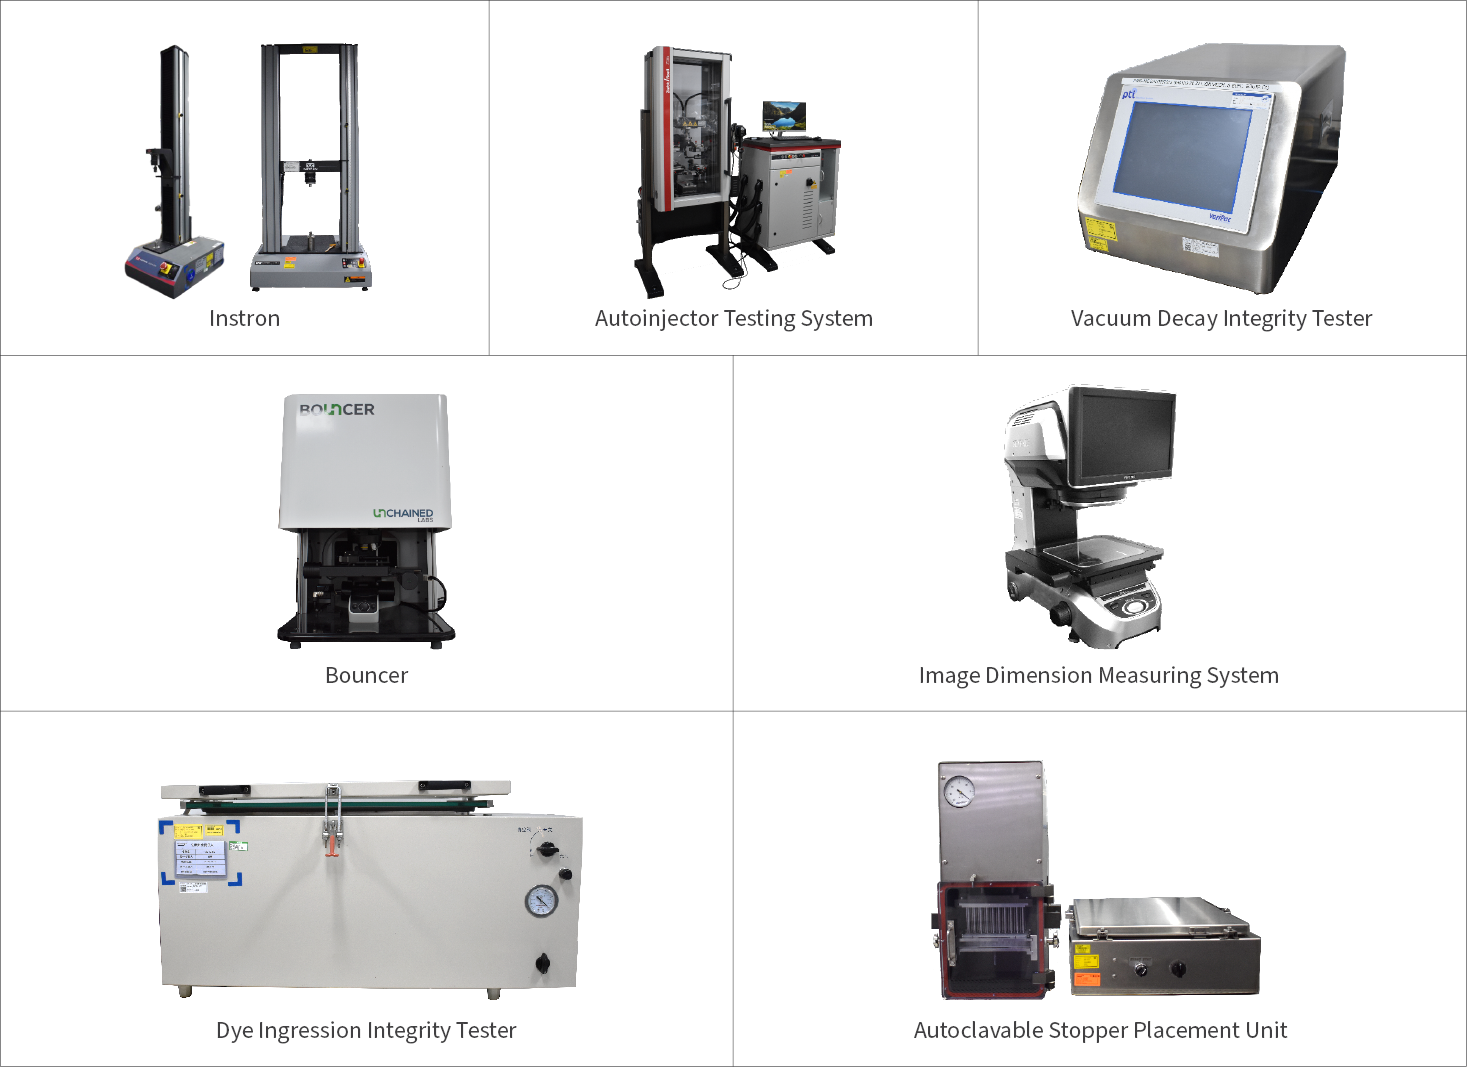 WuXi Biologics State of the Art Equipment for Drug Product Development - Combo Products